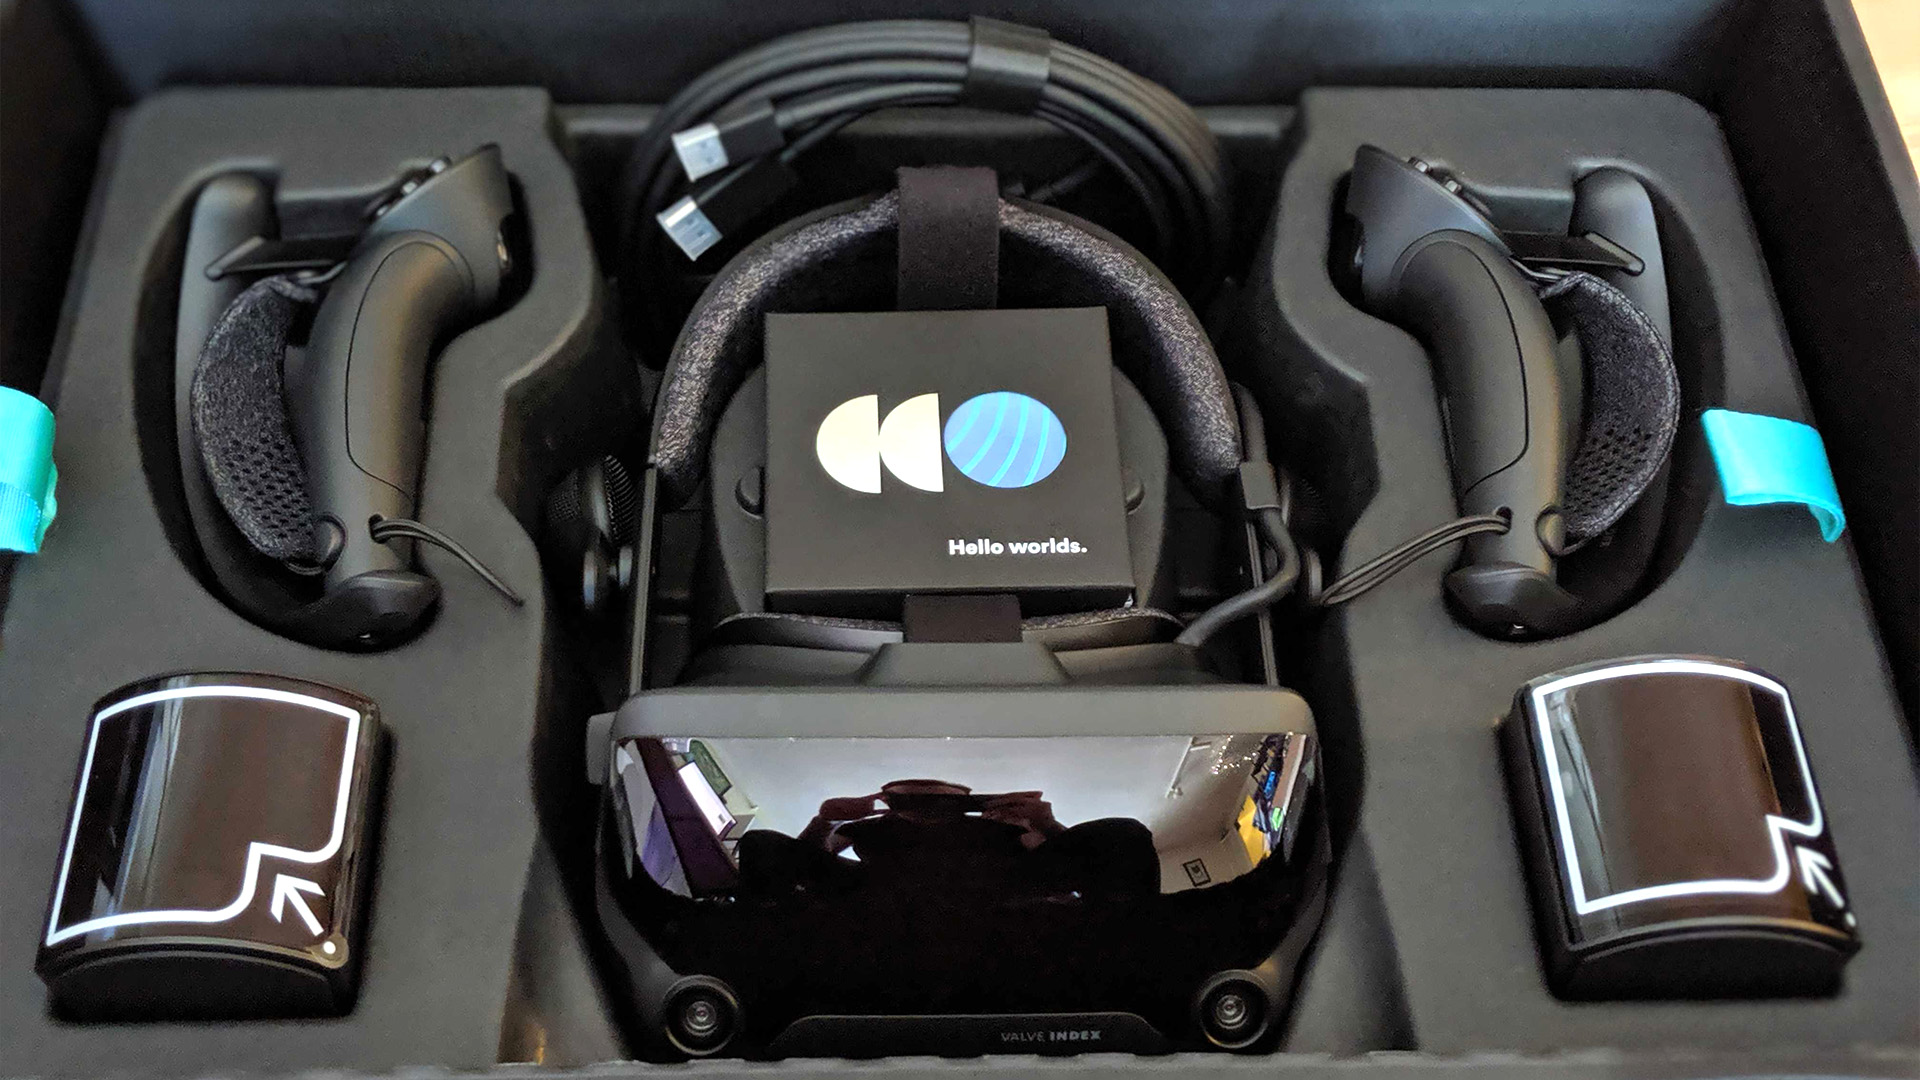 Valve Index virtual reality headset in box